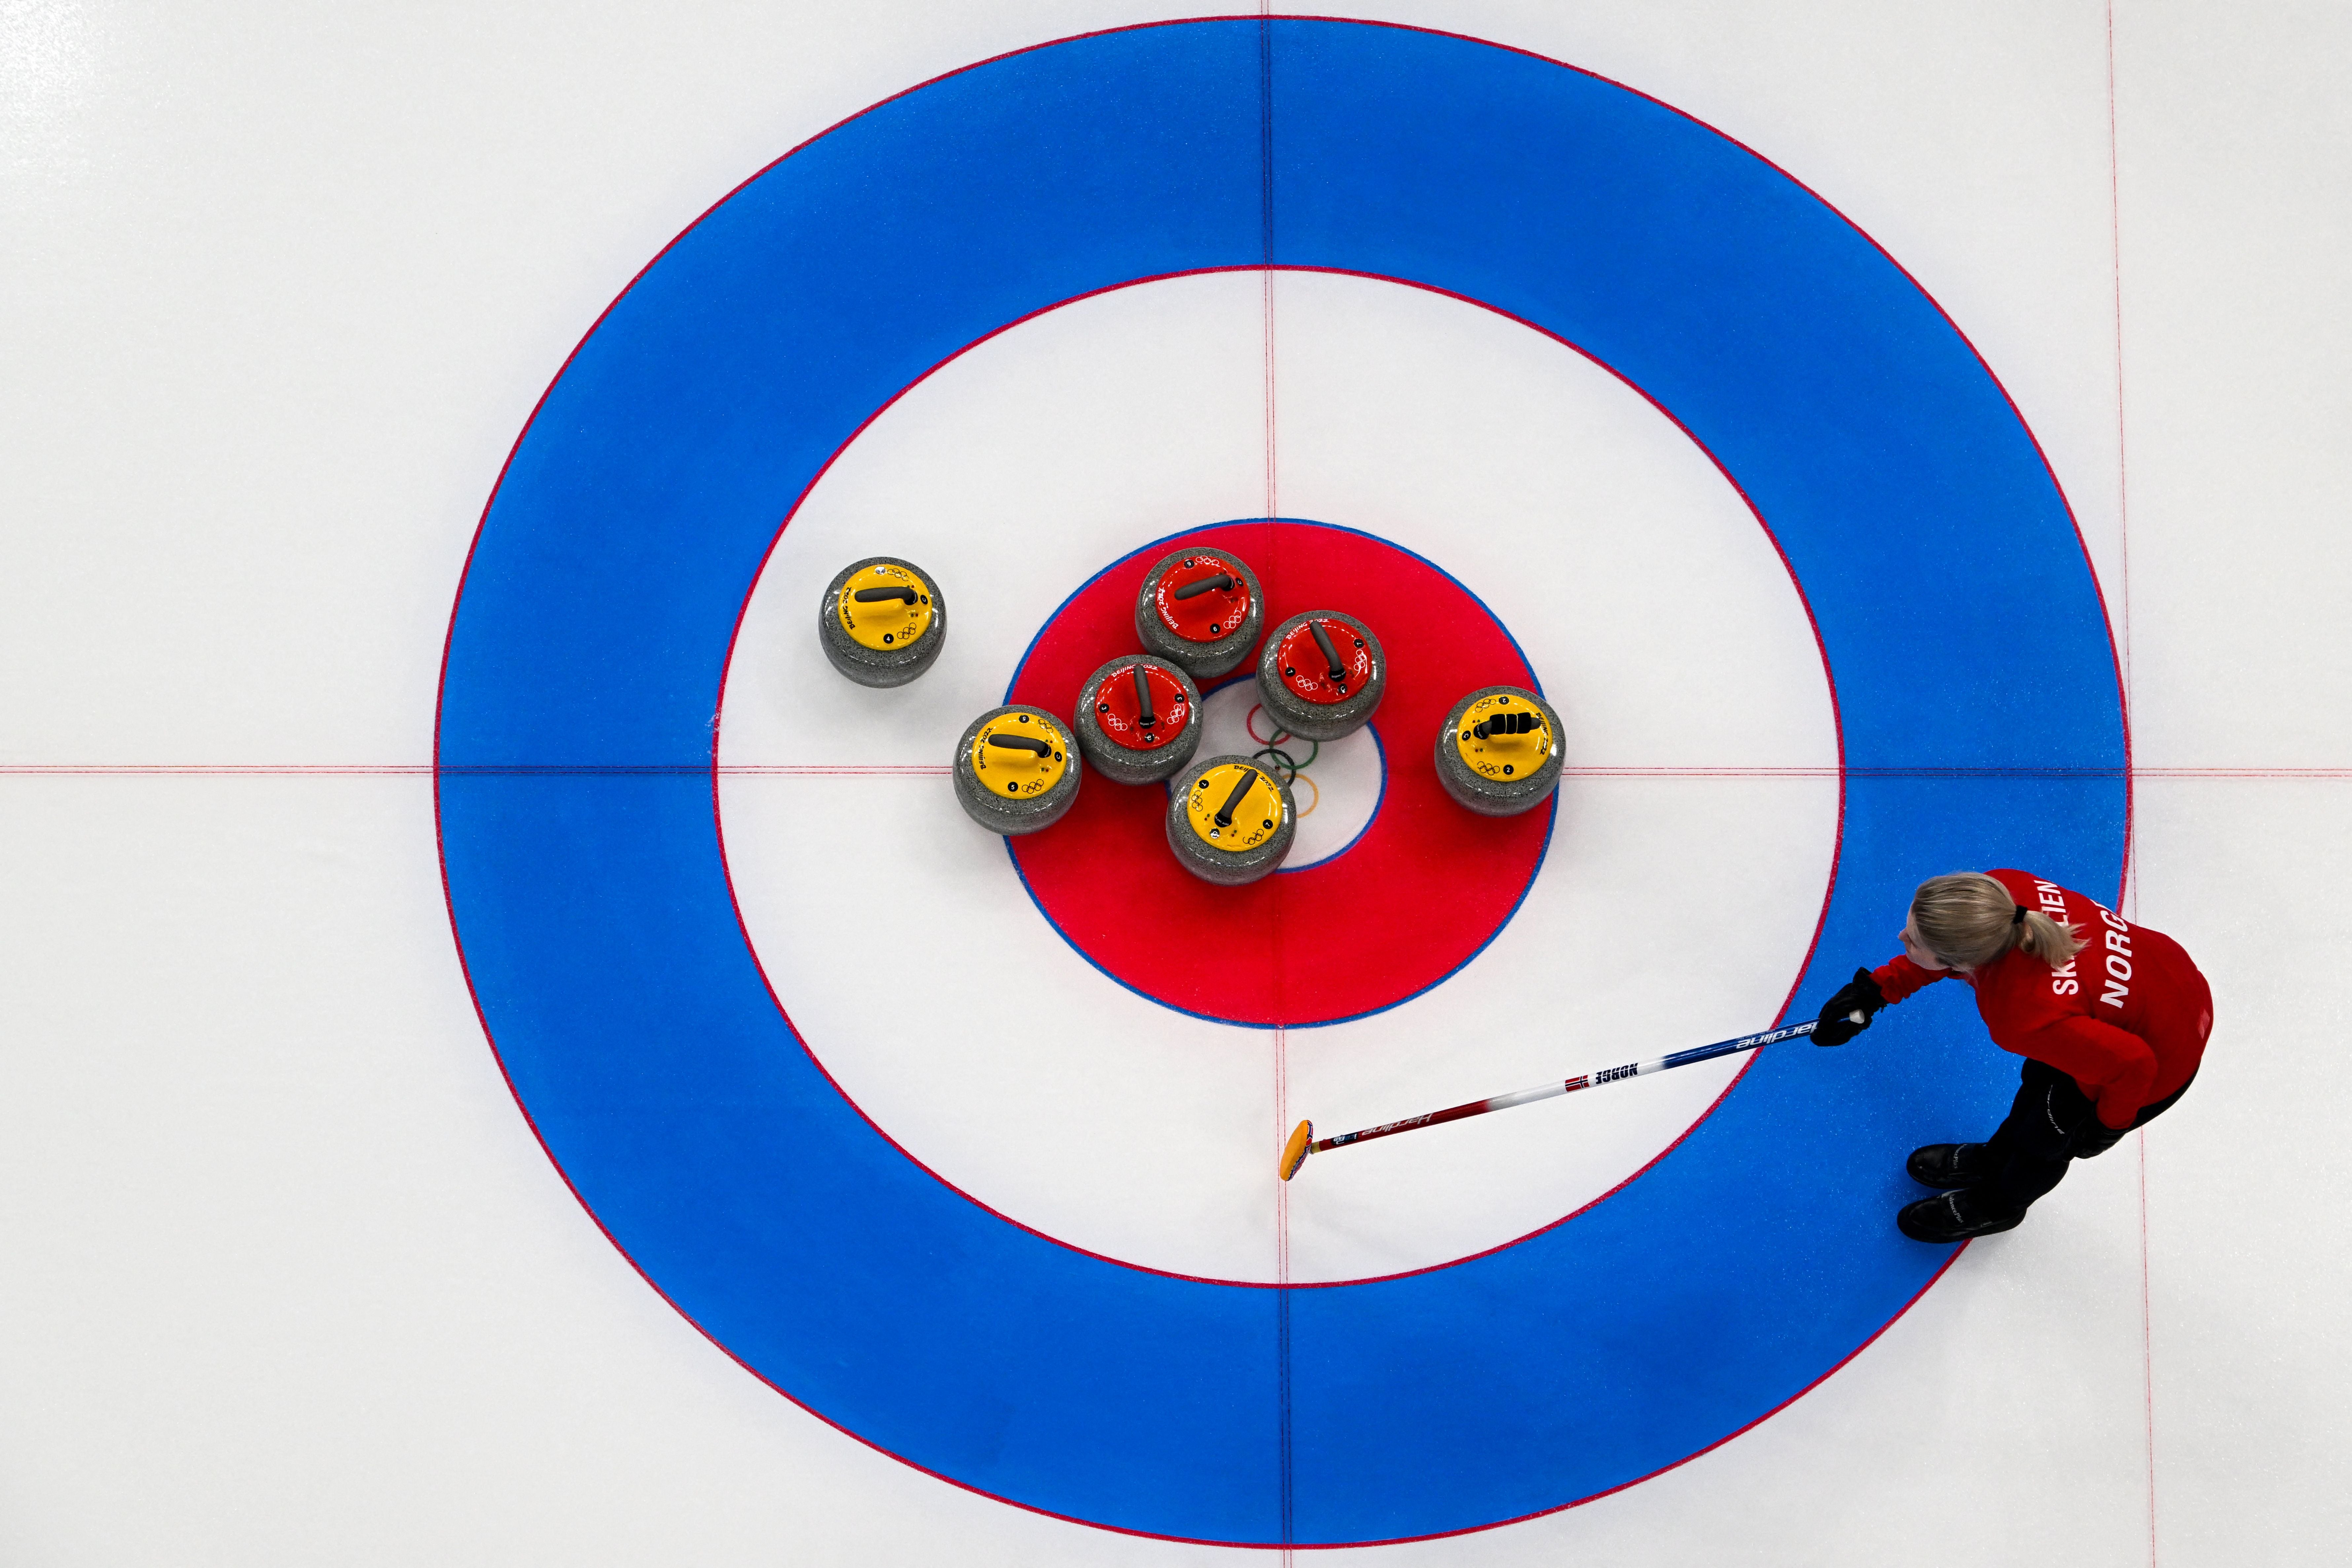 There are three curling medal events at Beijing 2022